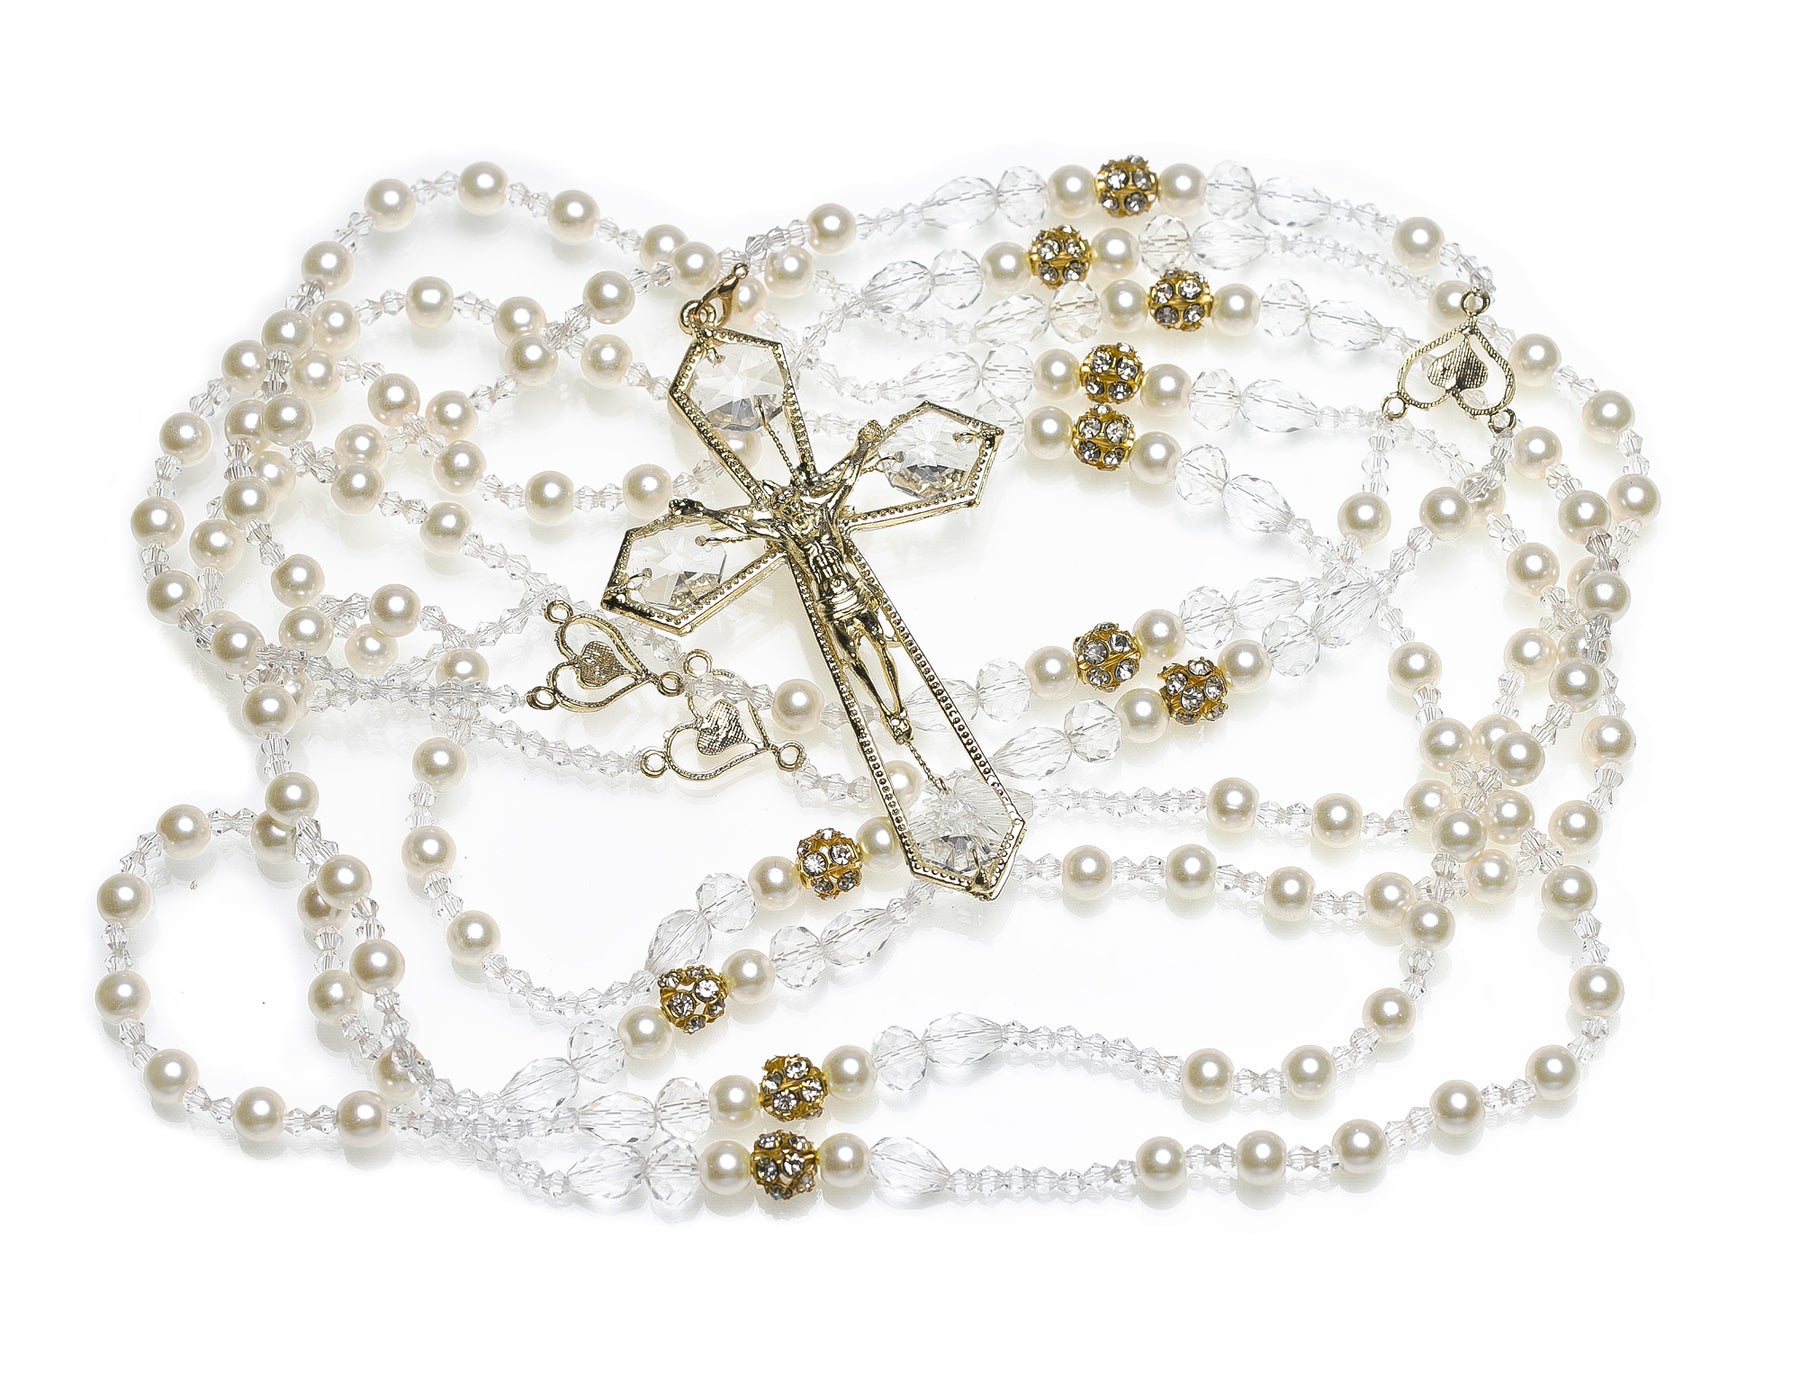 The Delicate Pearl Crystal Wedding Lazo